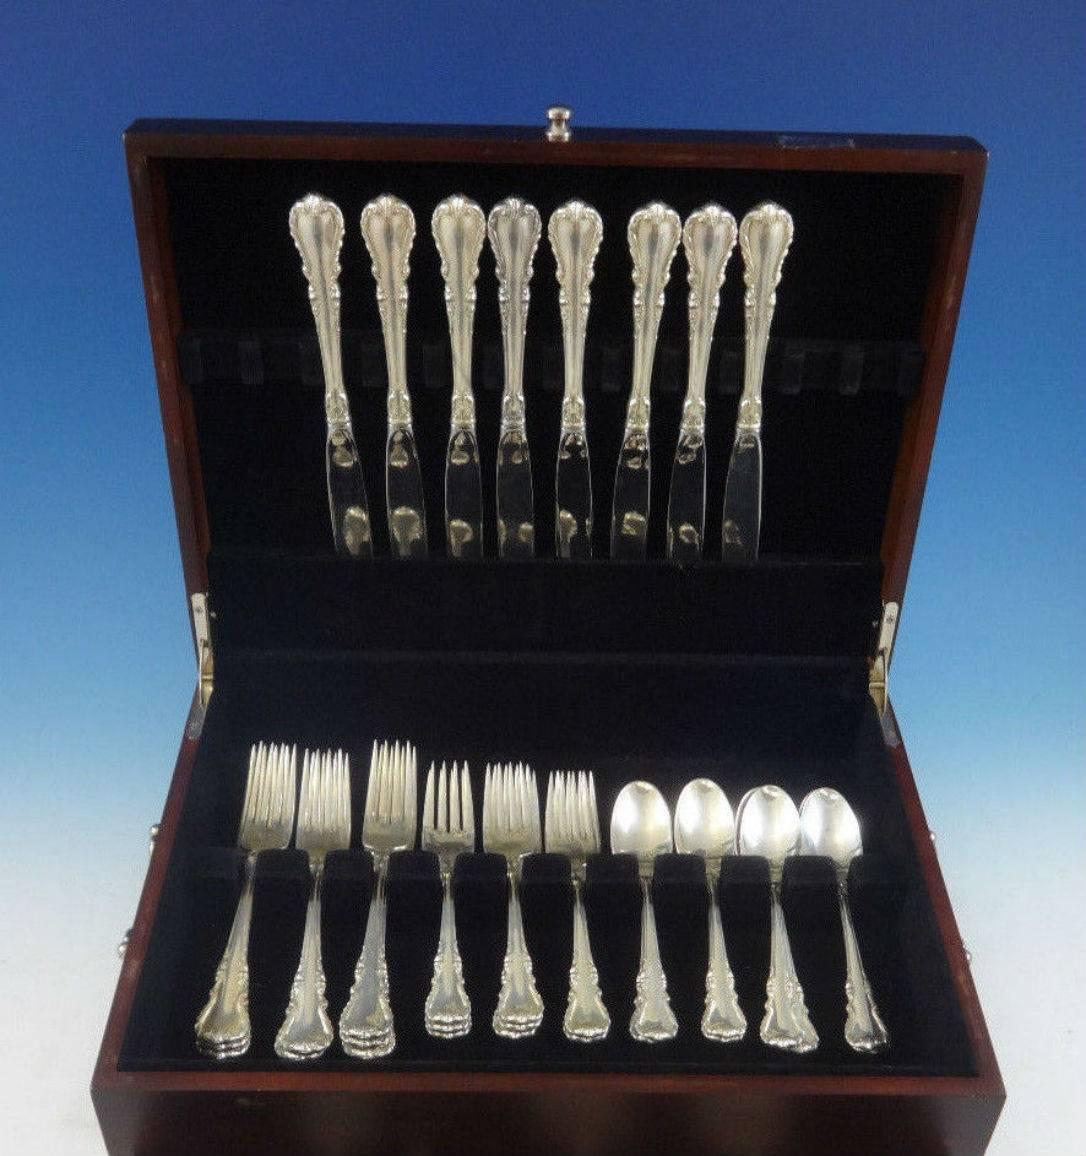 Melanie by Wallace sterling silver flatware set - 32 piece set. This set includes:

Measure: Eight dinner size knives, 9 1/2